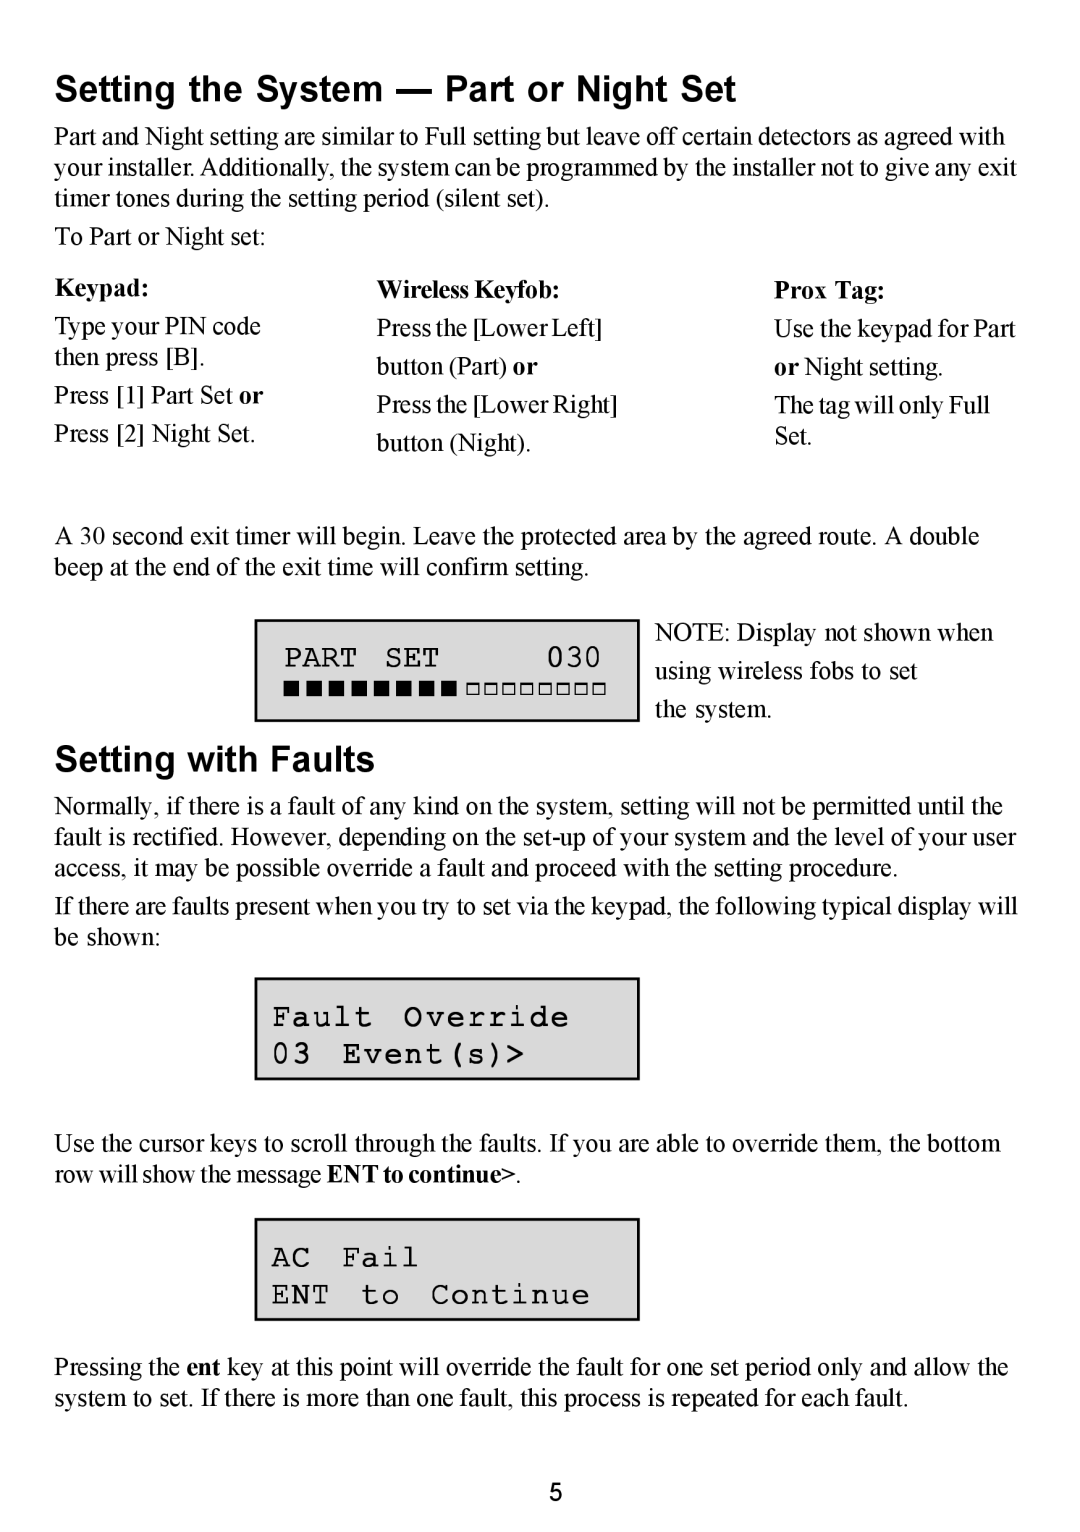 Honeywell 16103 Setting the System - Part or Night Set, Setting with Faults, Part Set, Fault Override 03 Events, Keypad 